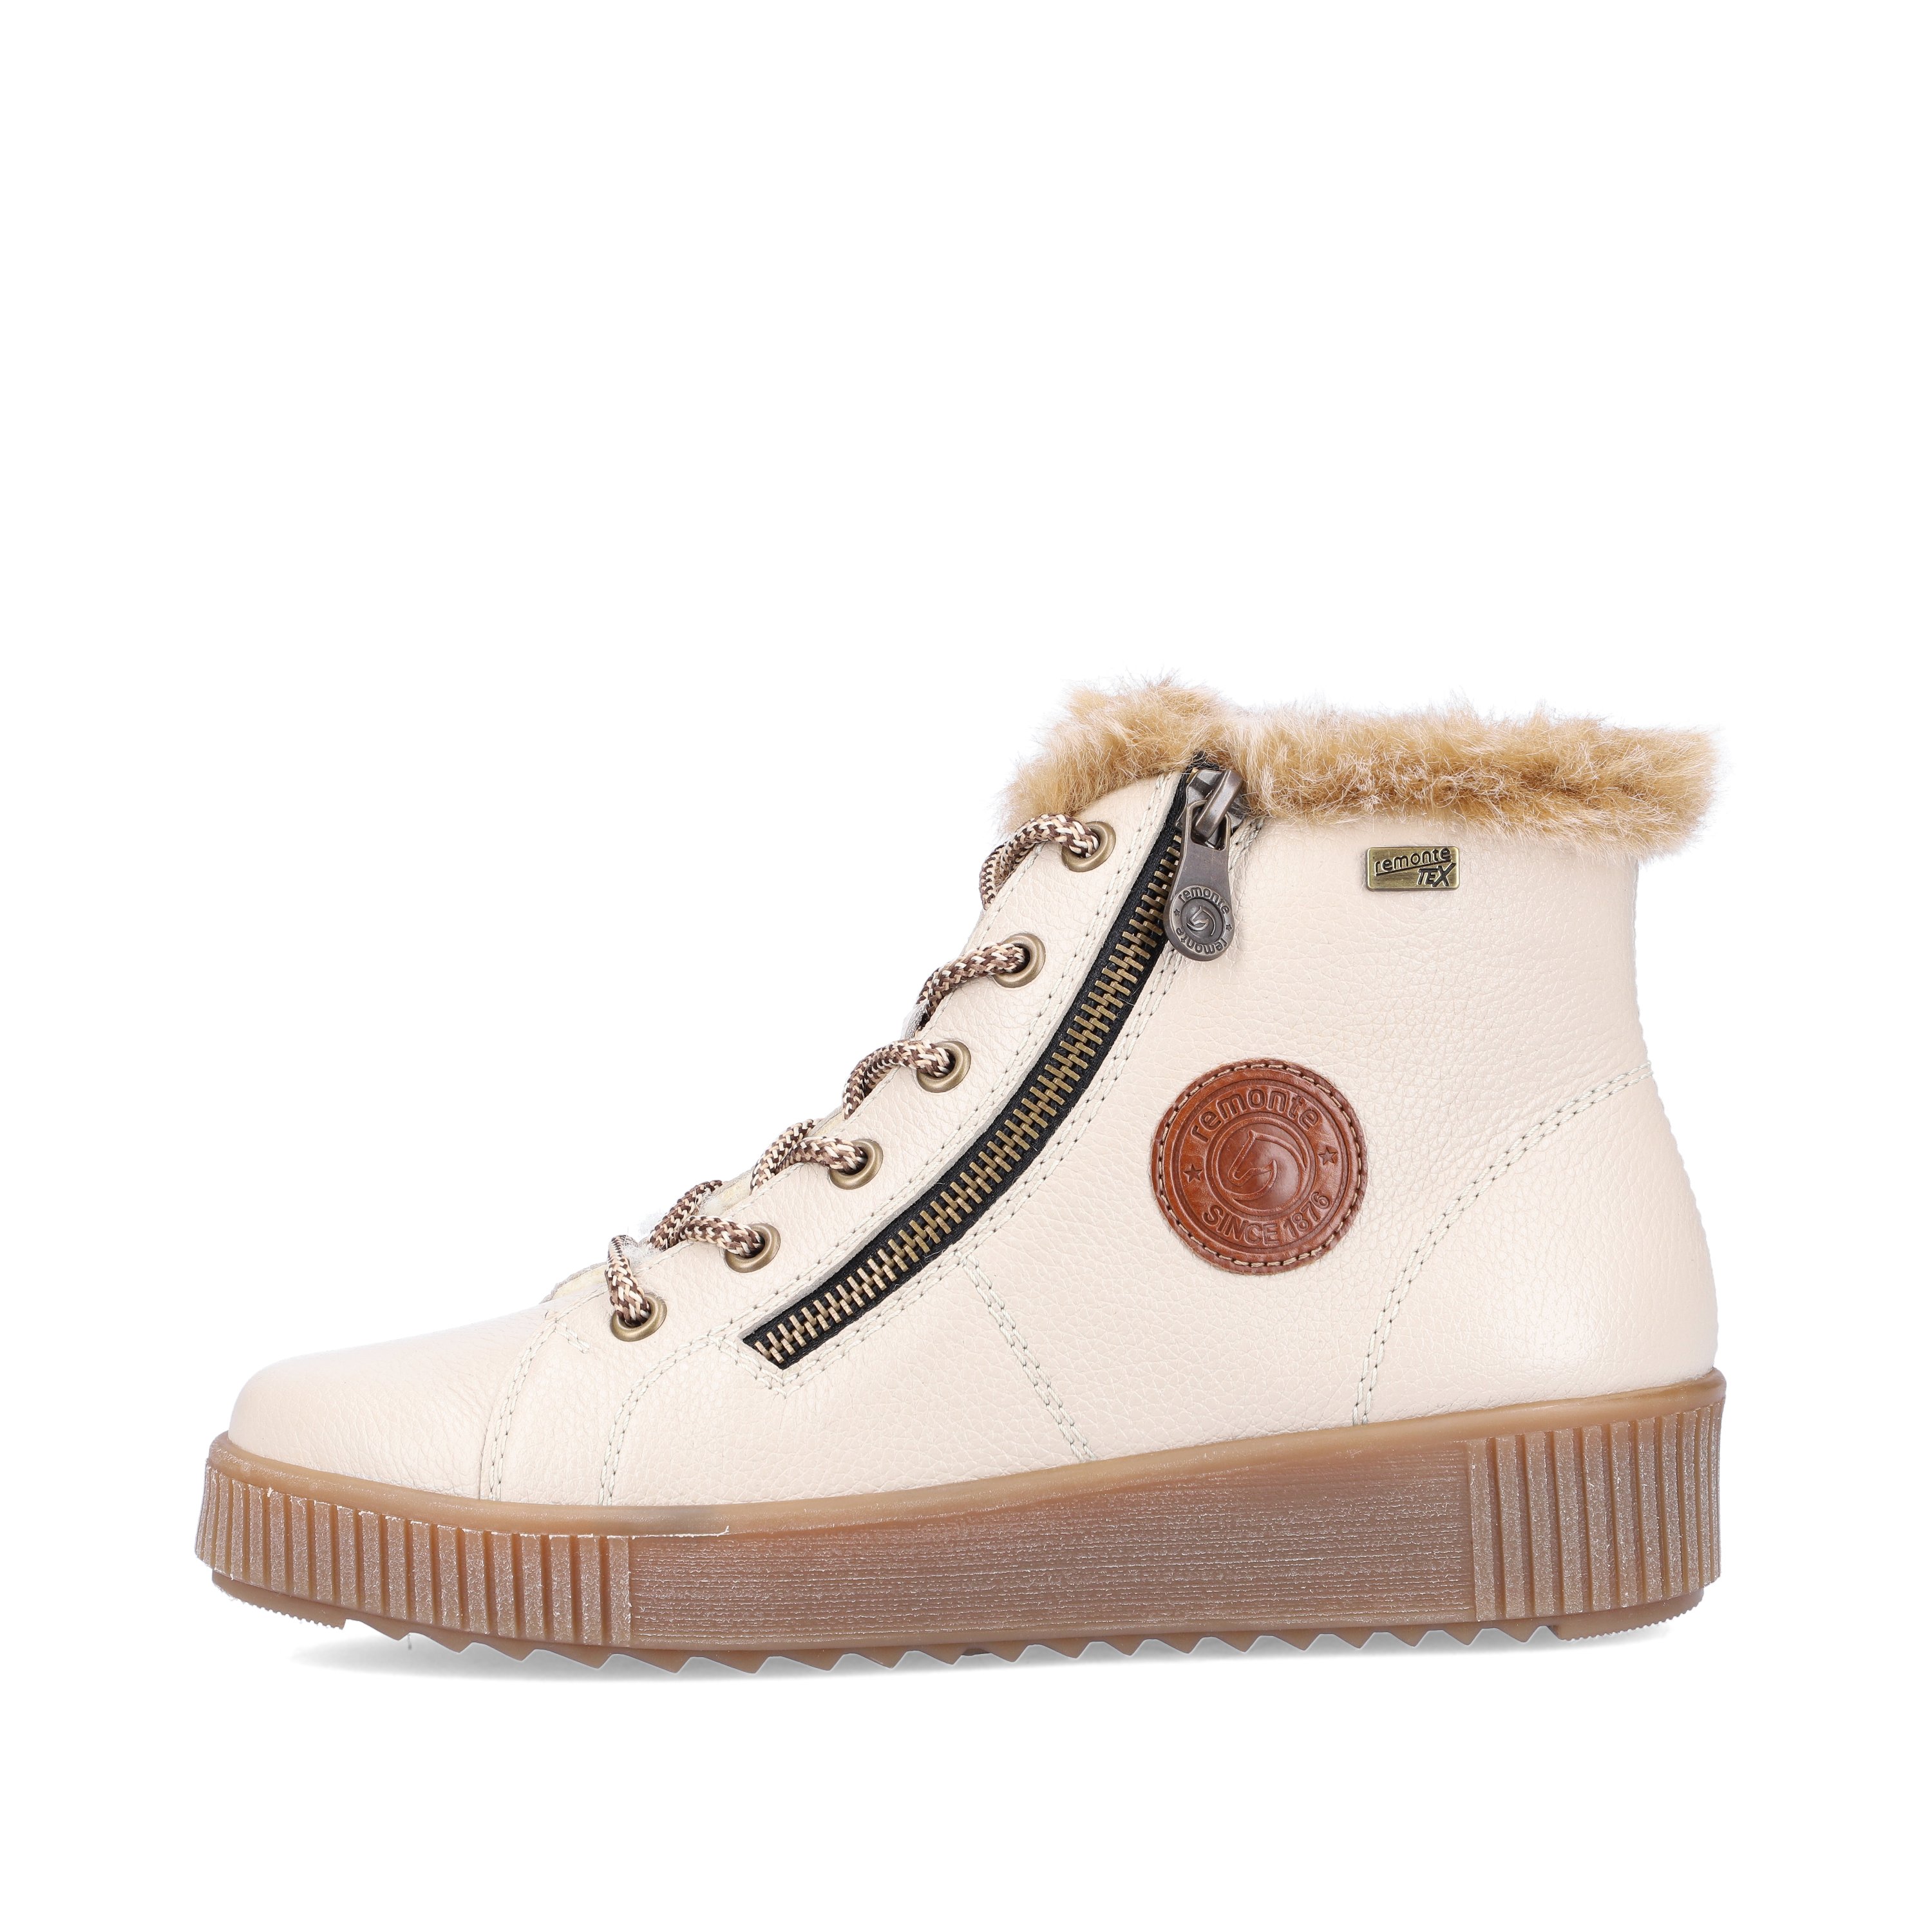 Cinnamon white remonte women´s lace-up boots R7980-80 with lacing and zipper. The outside of the shoe